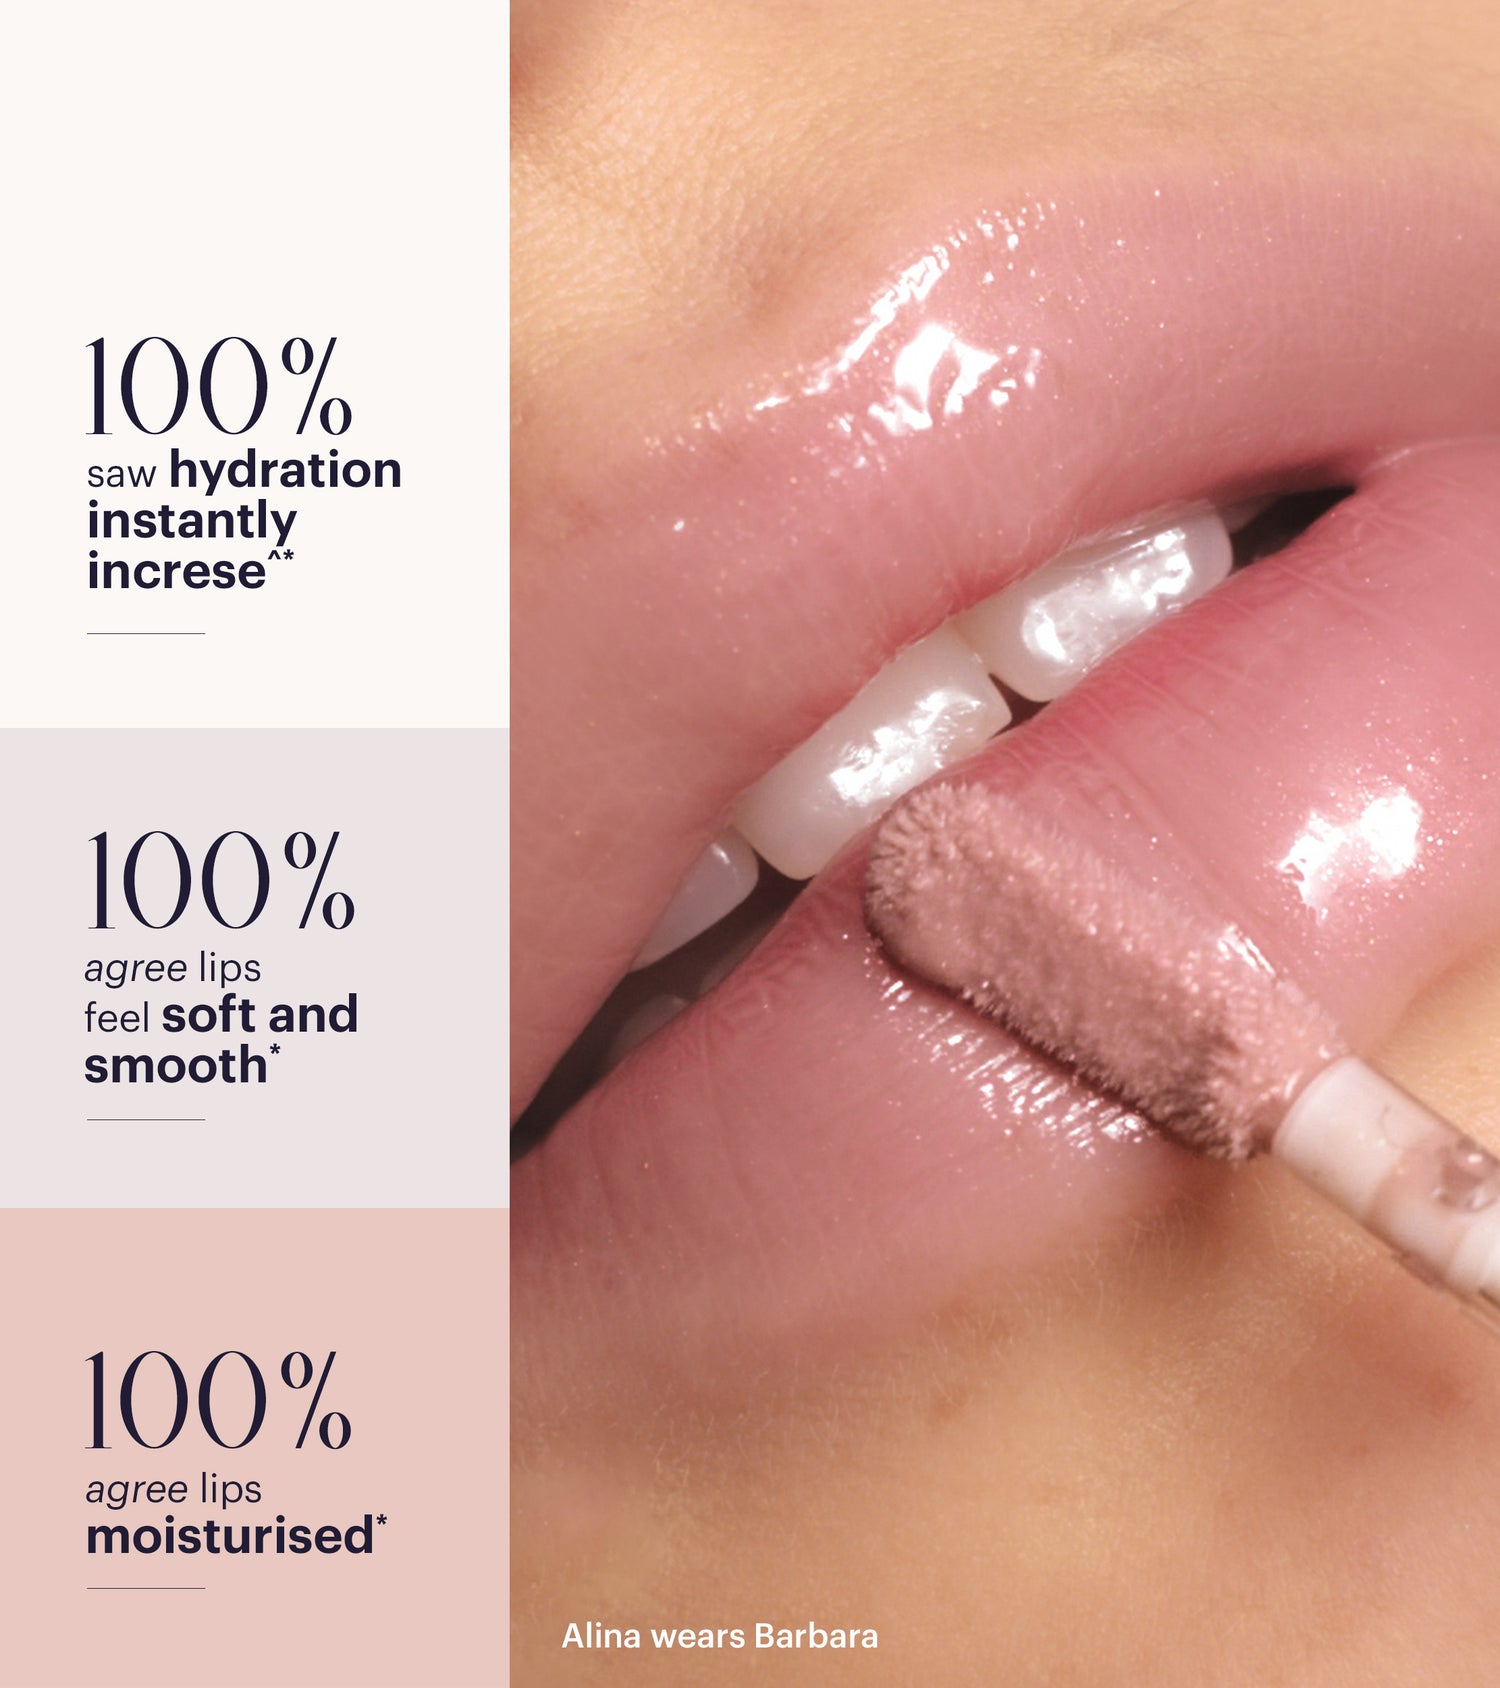 Pout Glaze High-Shine Hyaluronic Lip Gloss (Stephanie) Main Image featured